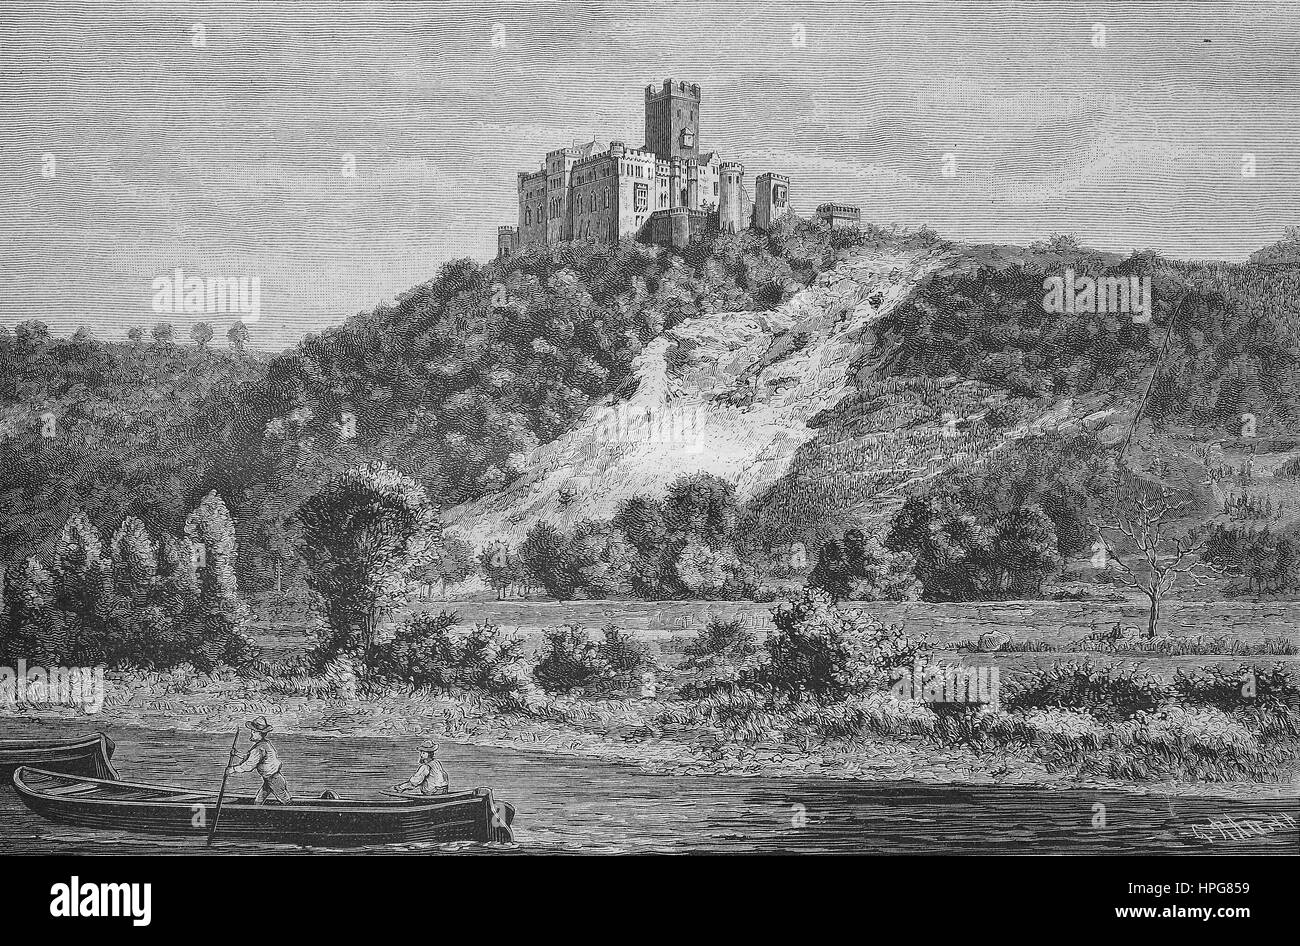 Lahneck Castle, Burg Lahneck, is a medieval fortress located in the city of Lahnstein in Rhineland-Palatinate, Germany, view in the 19. century, digital improved reproduction of a woodcut from the year 1885 Stock Photo